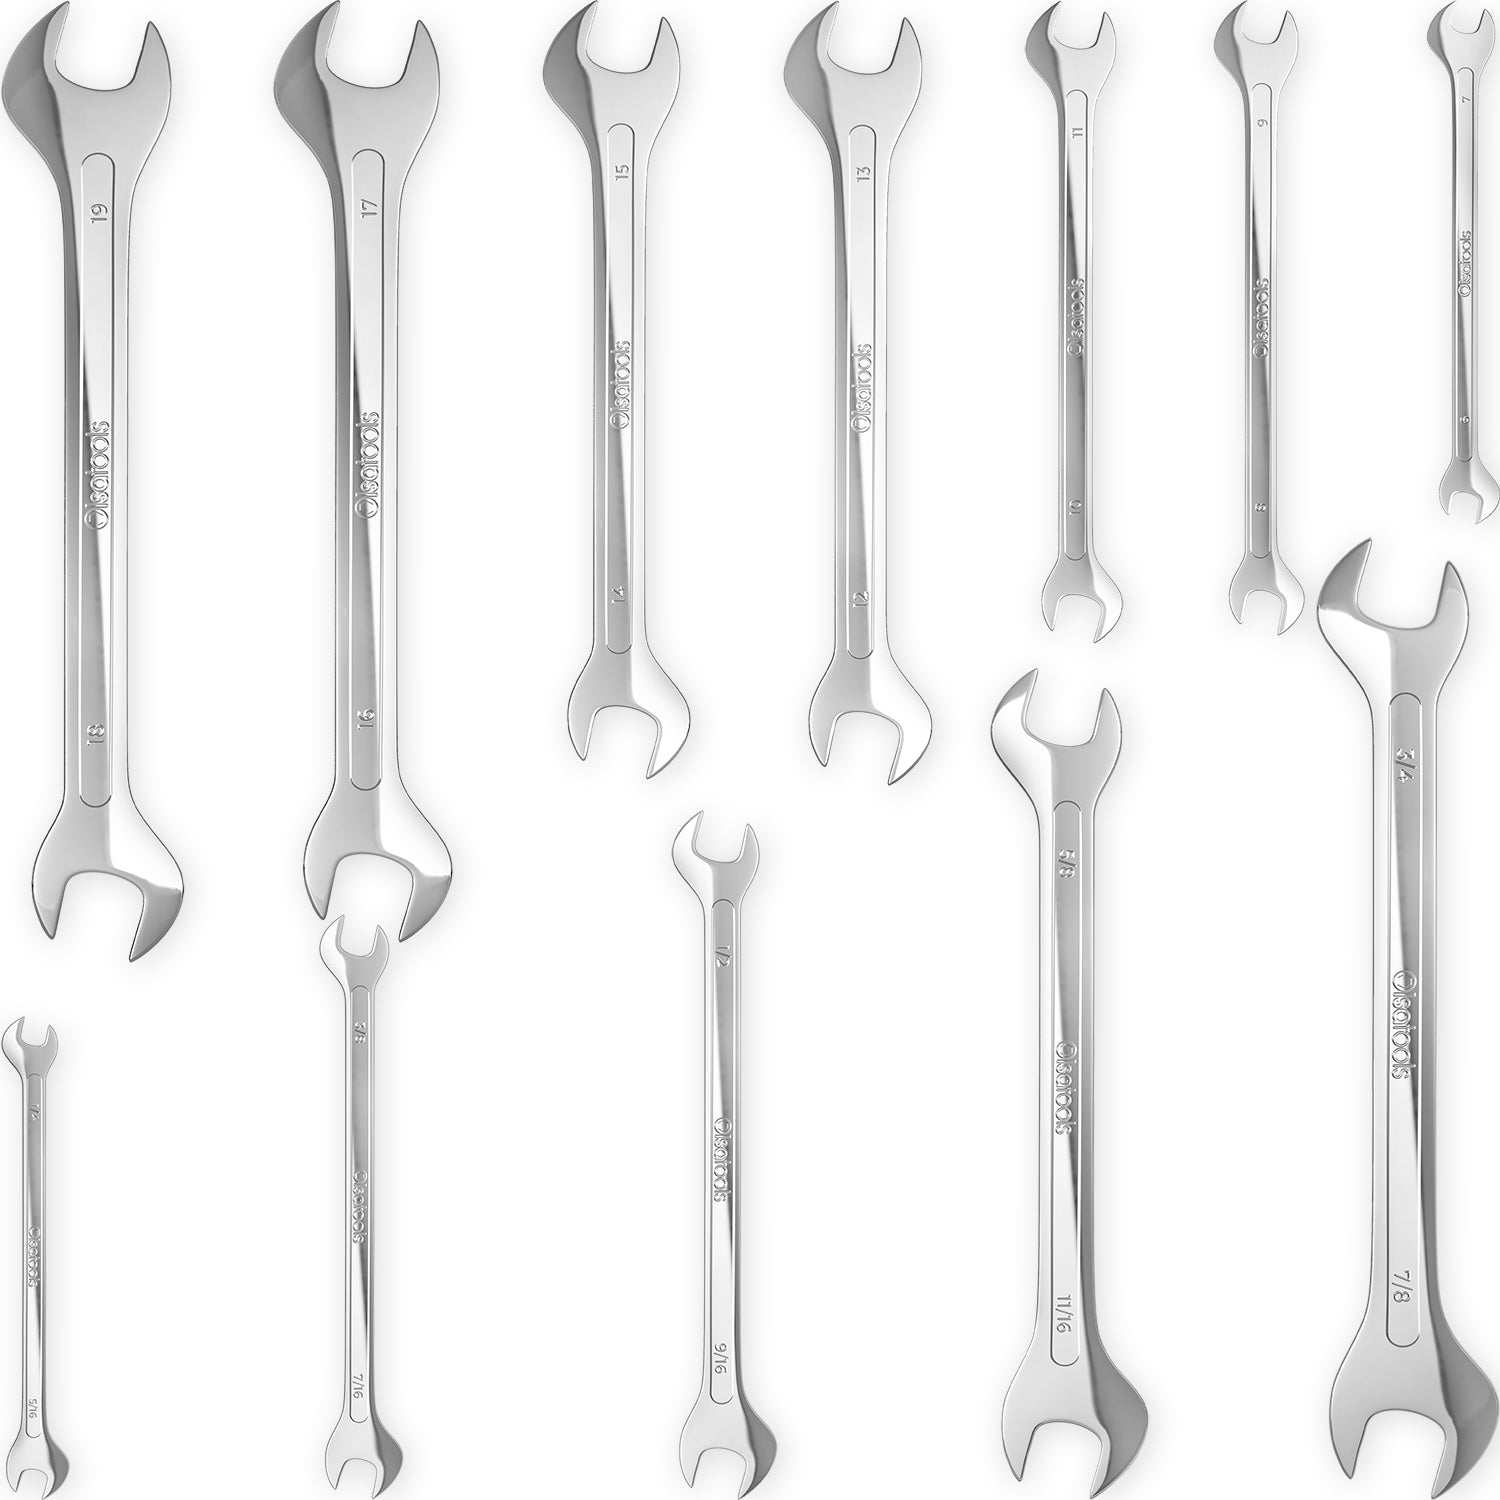 Professional-Grade Wrenches | Olsa Tools